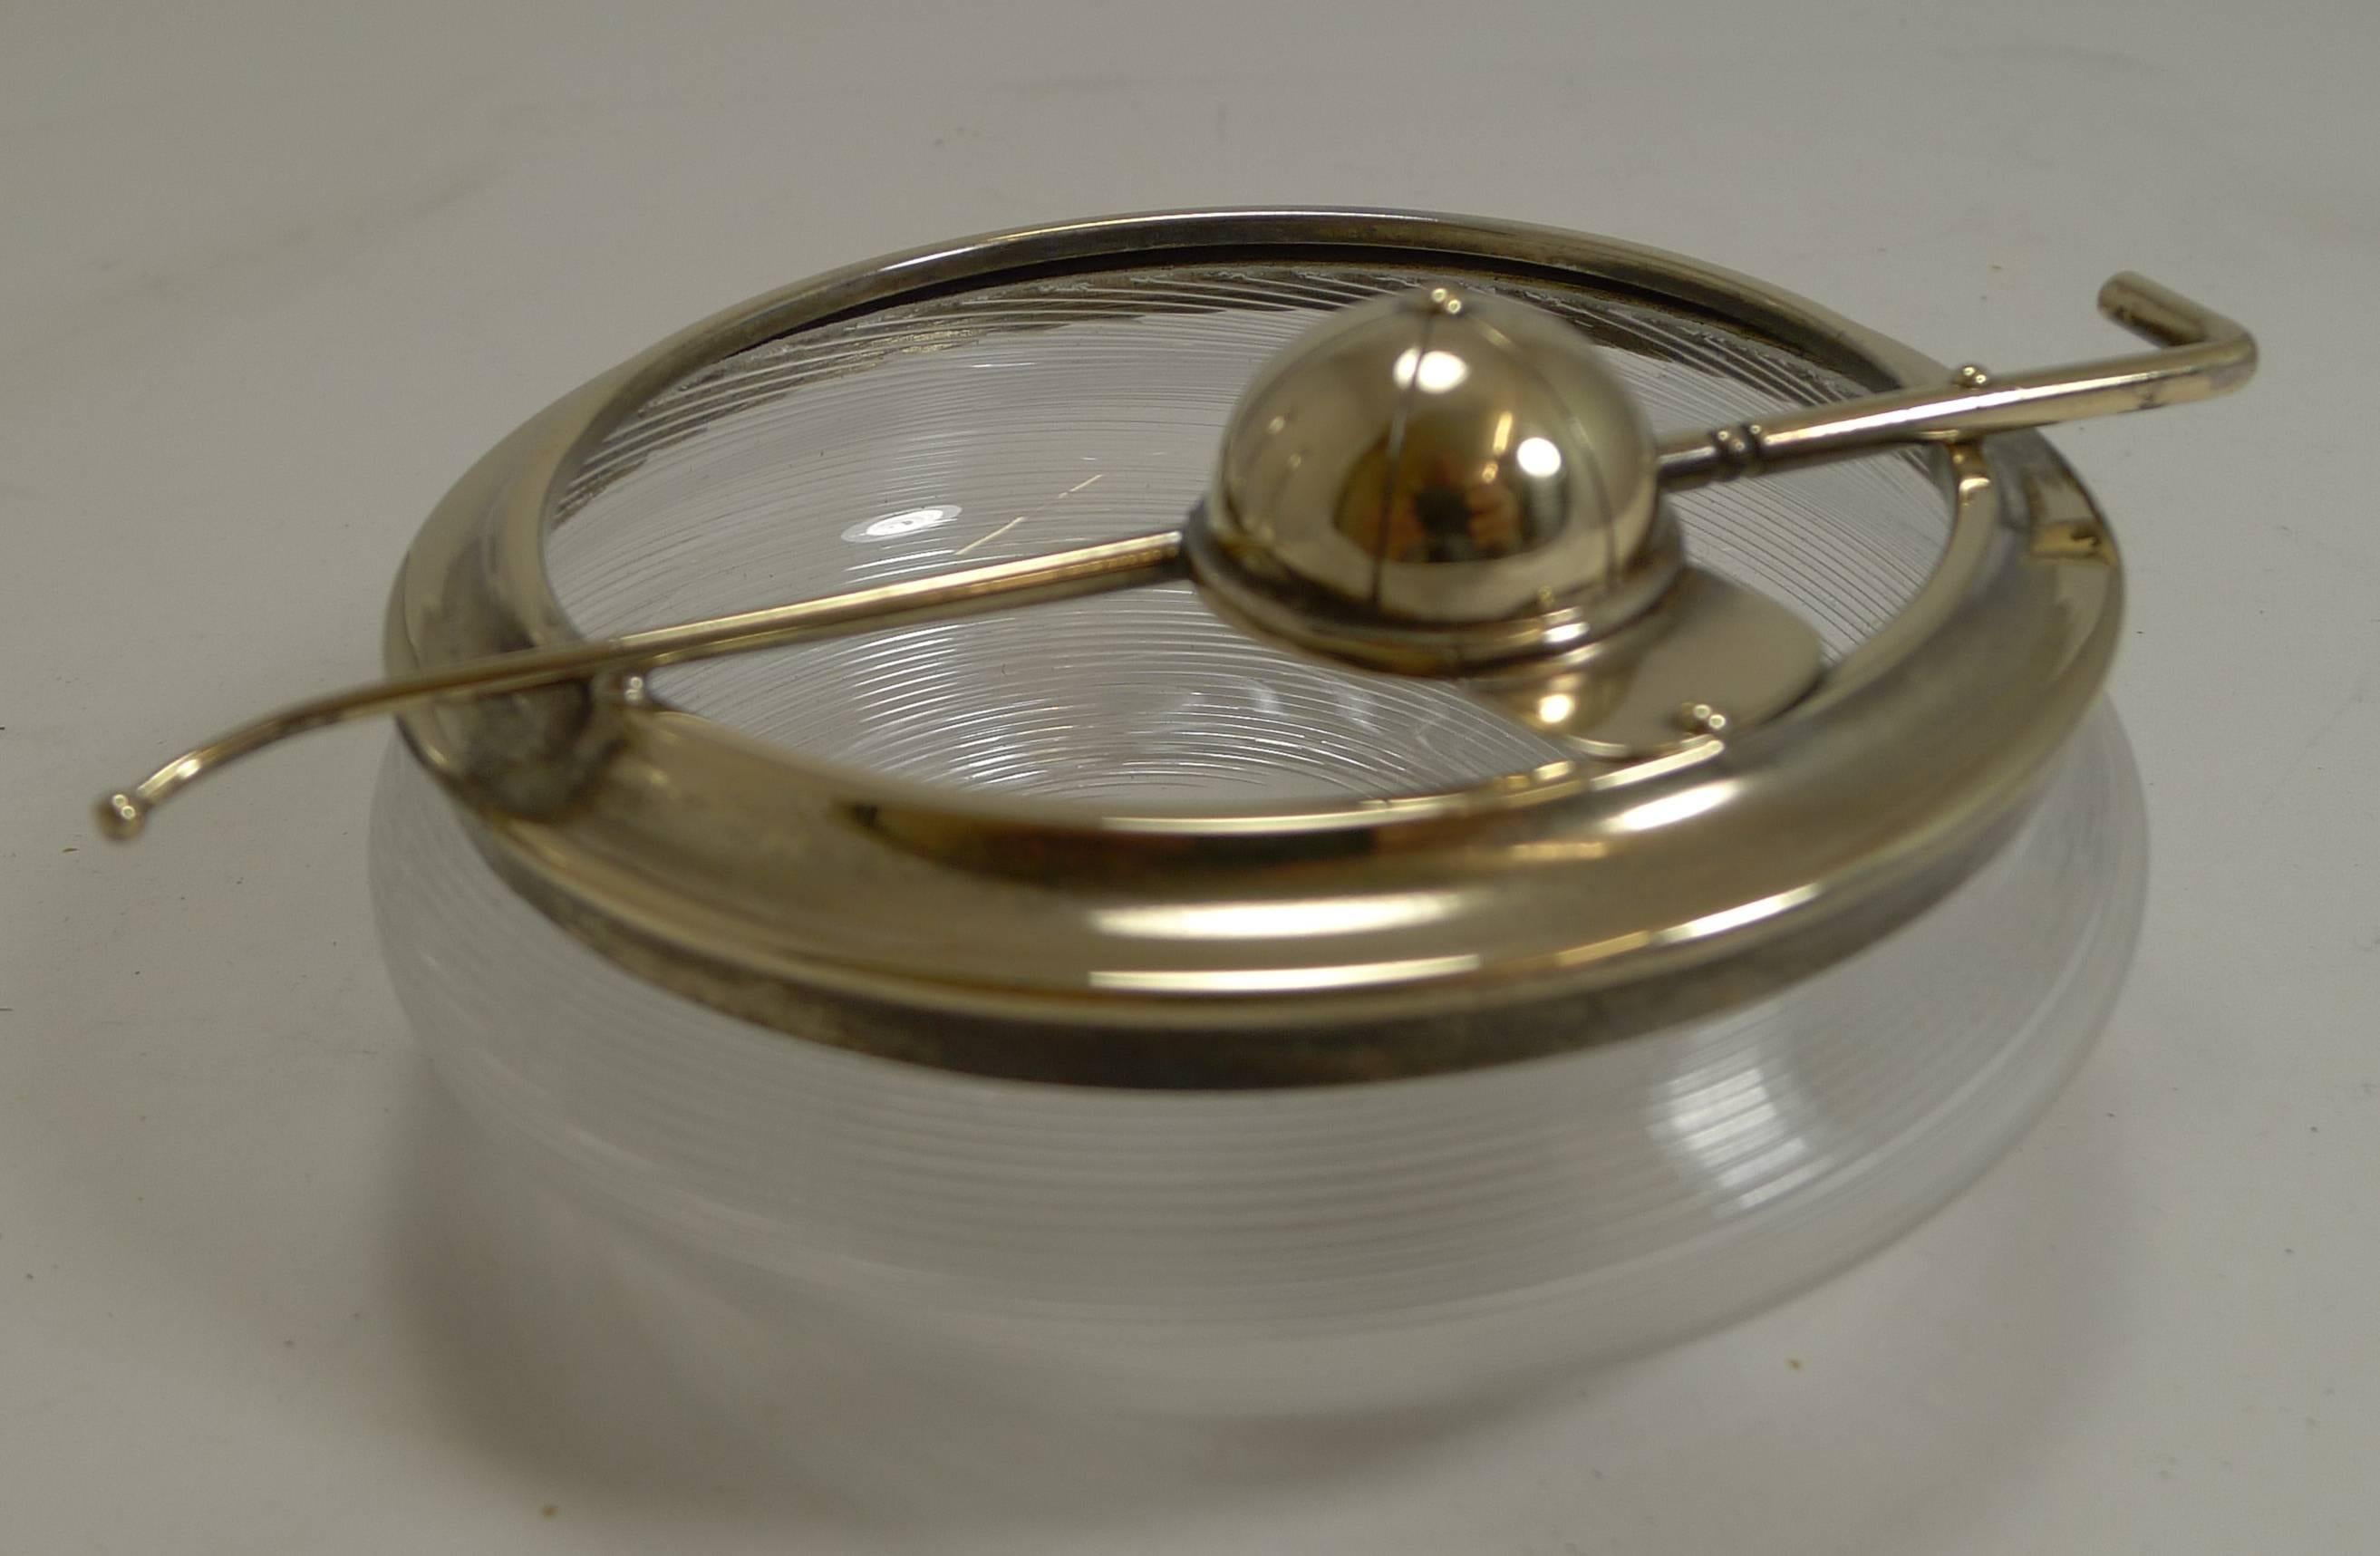 I absolutely love this most unusual dish, lovely quality and a real novelty for the equestrian or horse racing devotee.

Made from a lovely quality threaded glass, the rim, Jockey Cap and Crop all made from English polished brass.

Perfect for